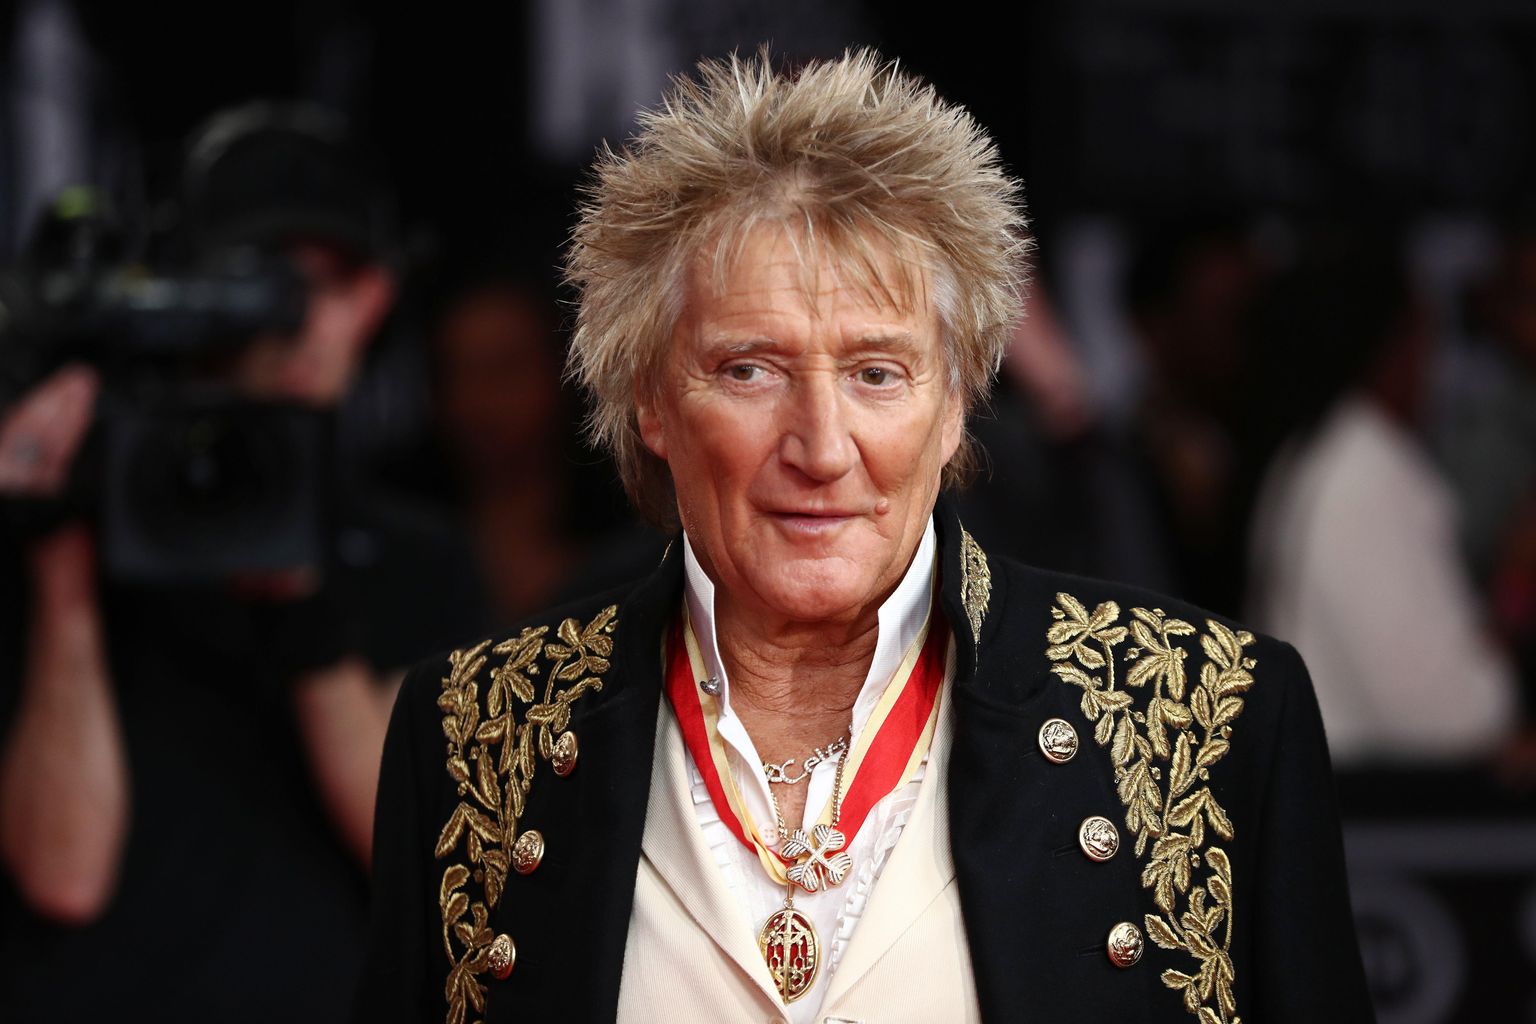 Sir Rod Stewart rents out his house to help Ukrainian refugees ...